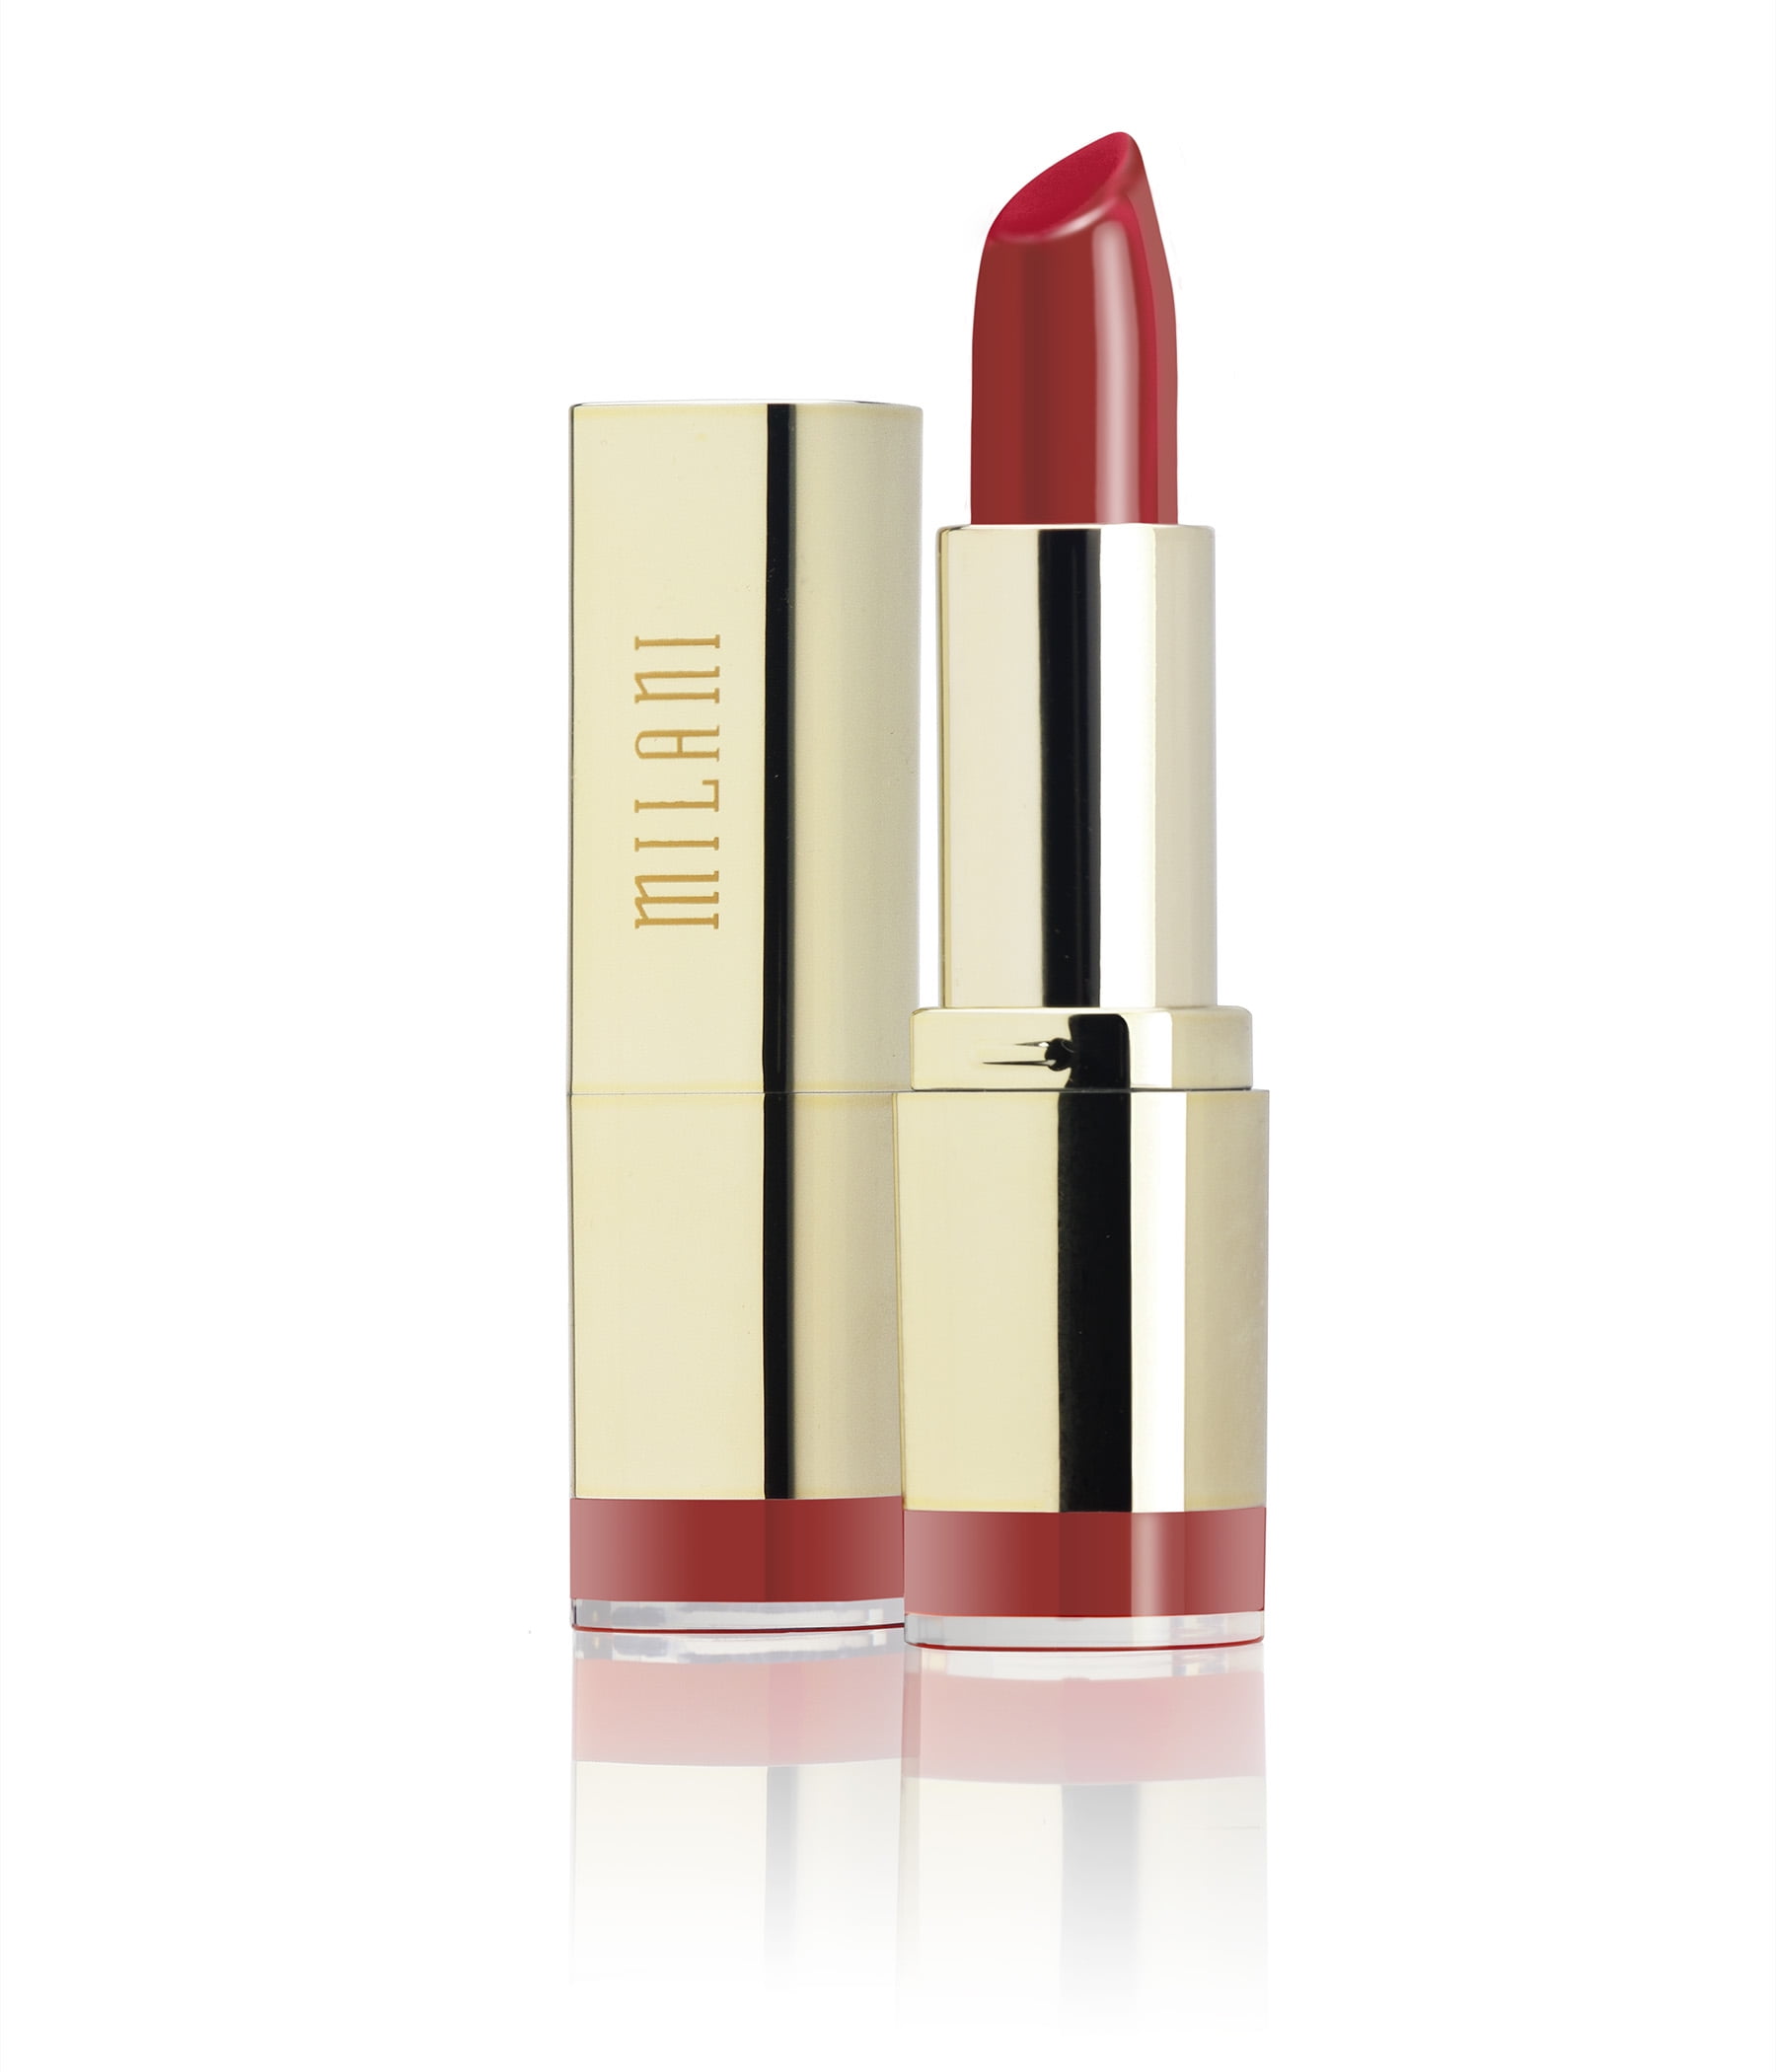 The 15 Best Red Lipsticks That Money Can Buy